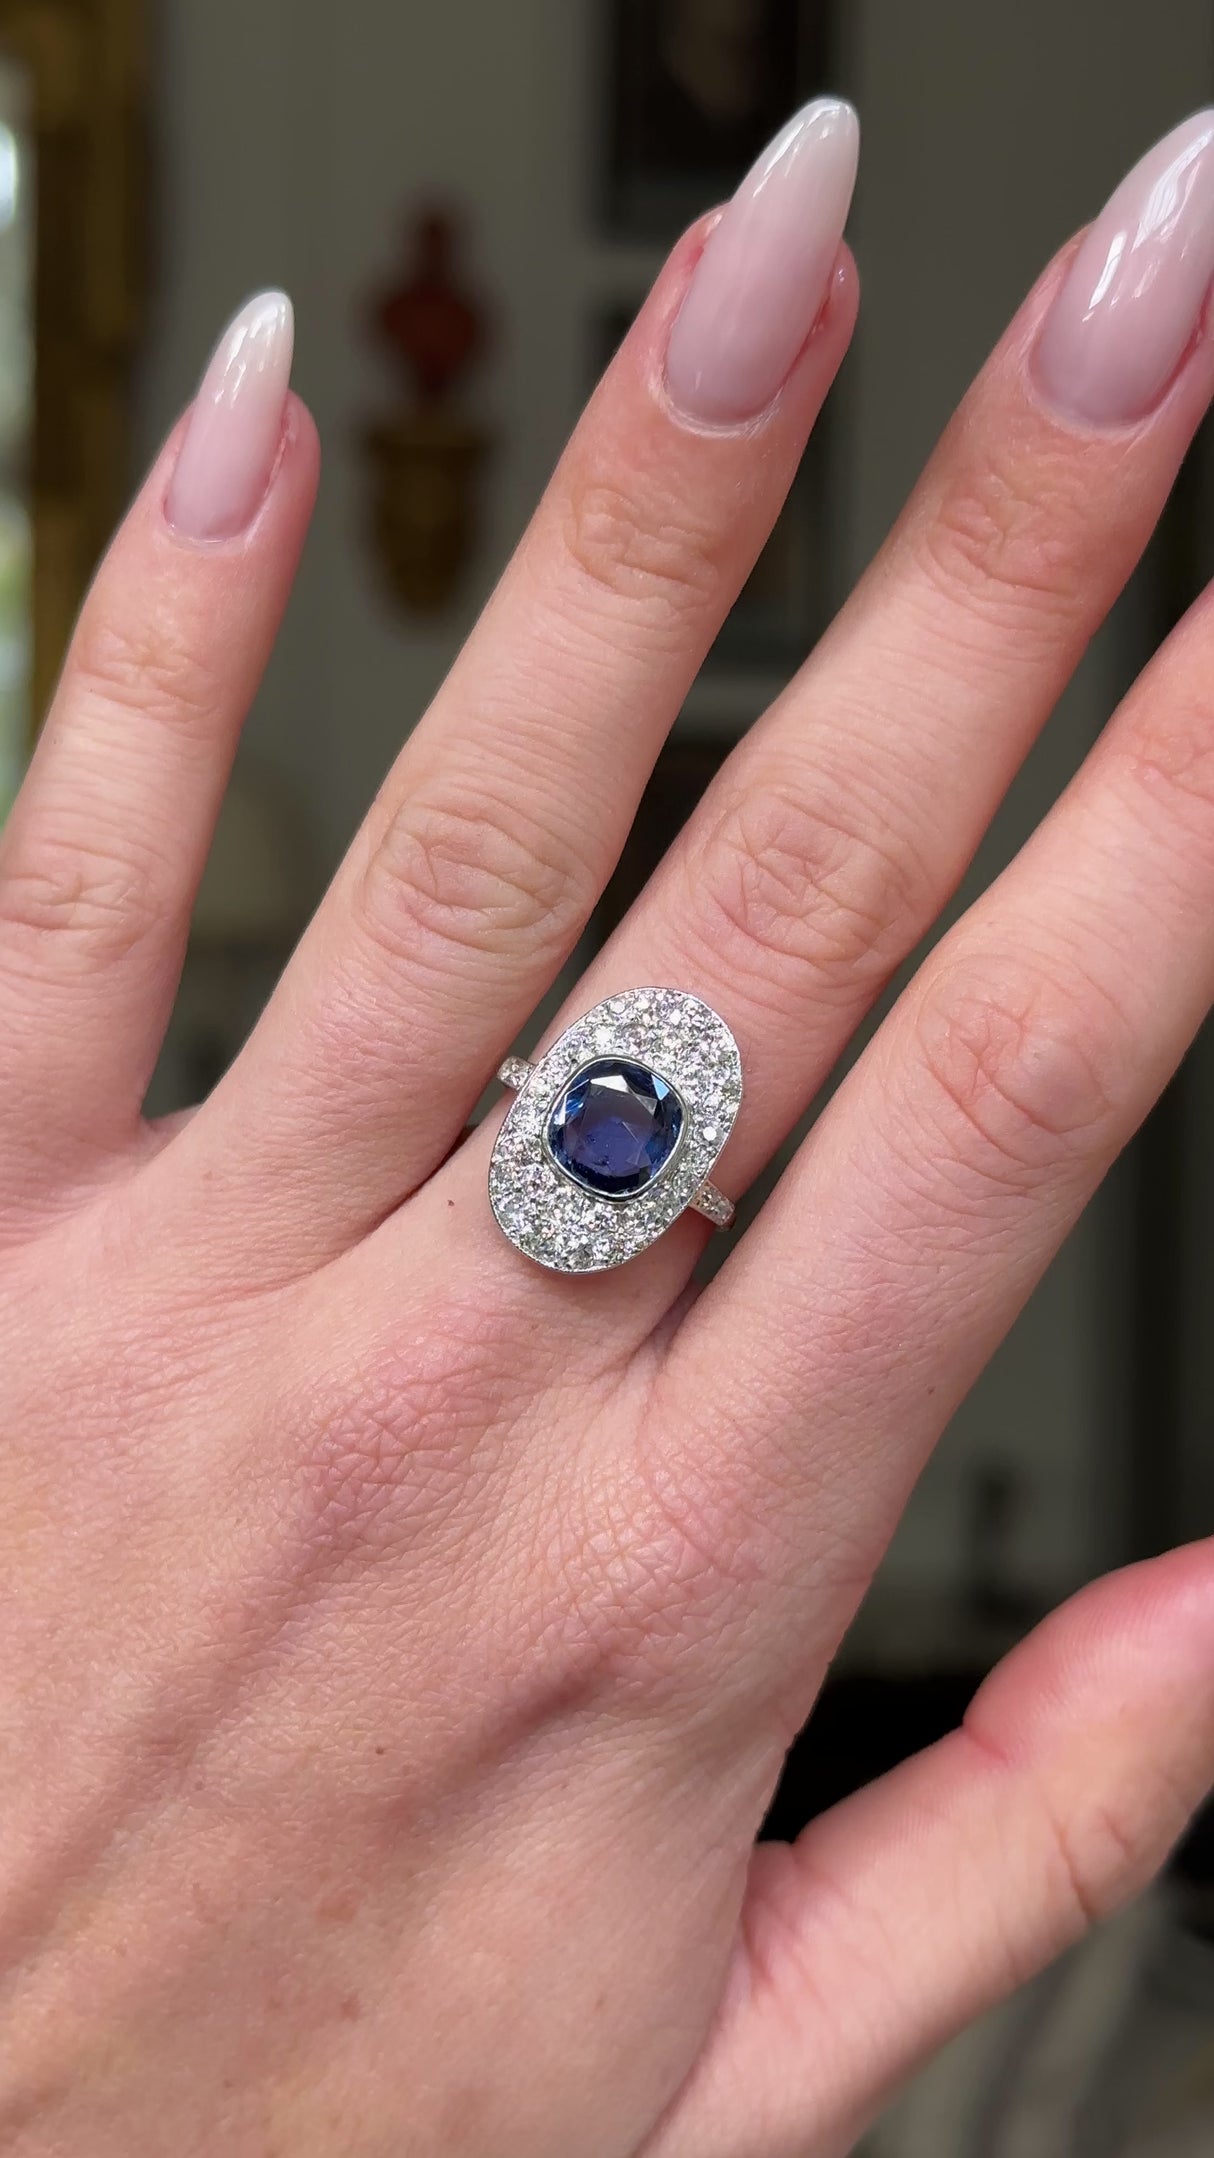 Edwardian sapphire and diamond ring, worn on hand and rotated to give perspective.